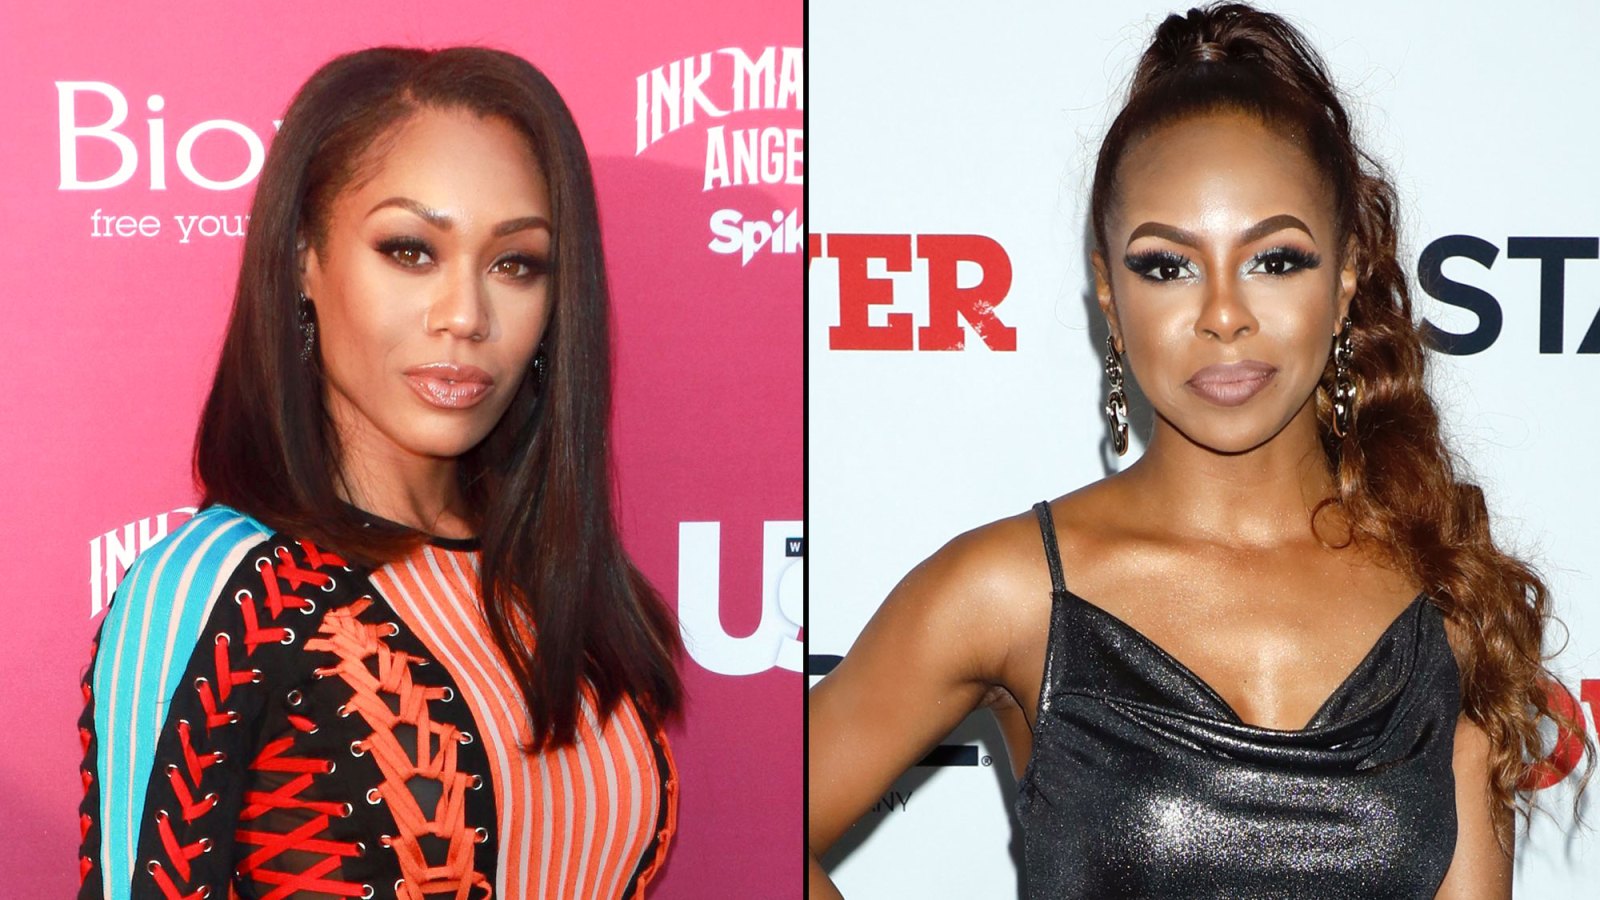 RHOP's Monique Samuels Has No Plans to Make Up With Candiace Dillard Amid Assault Charges